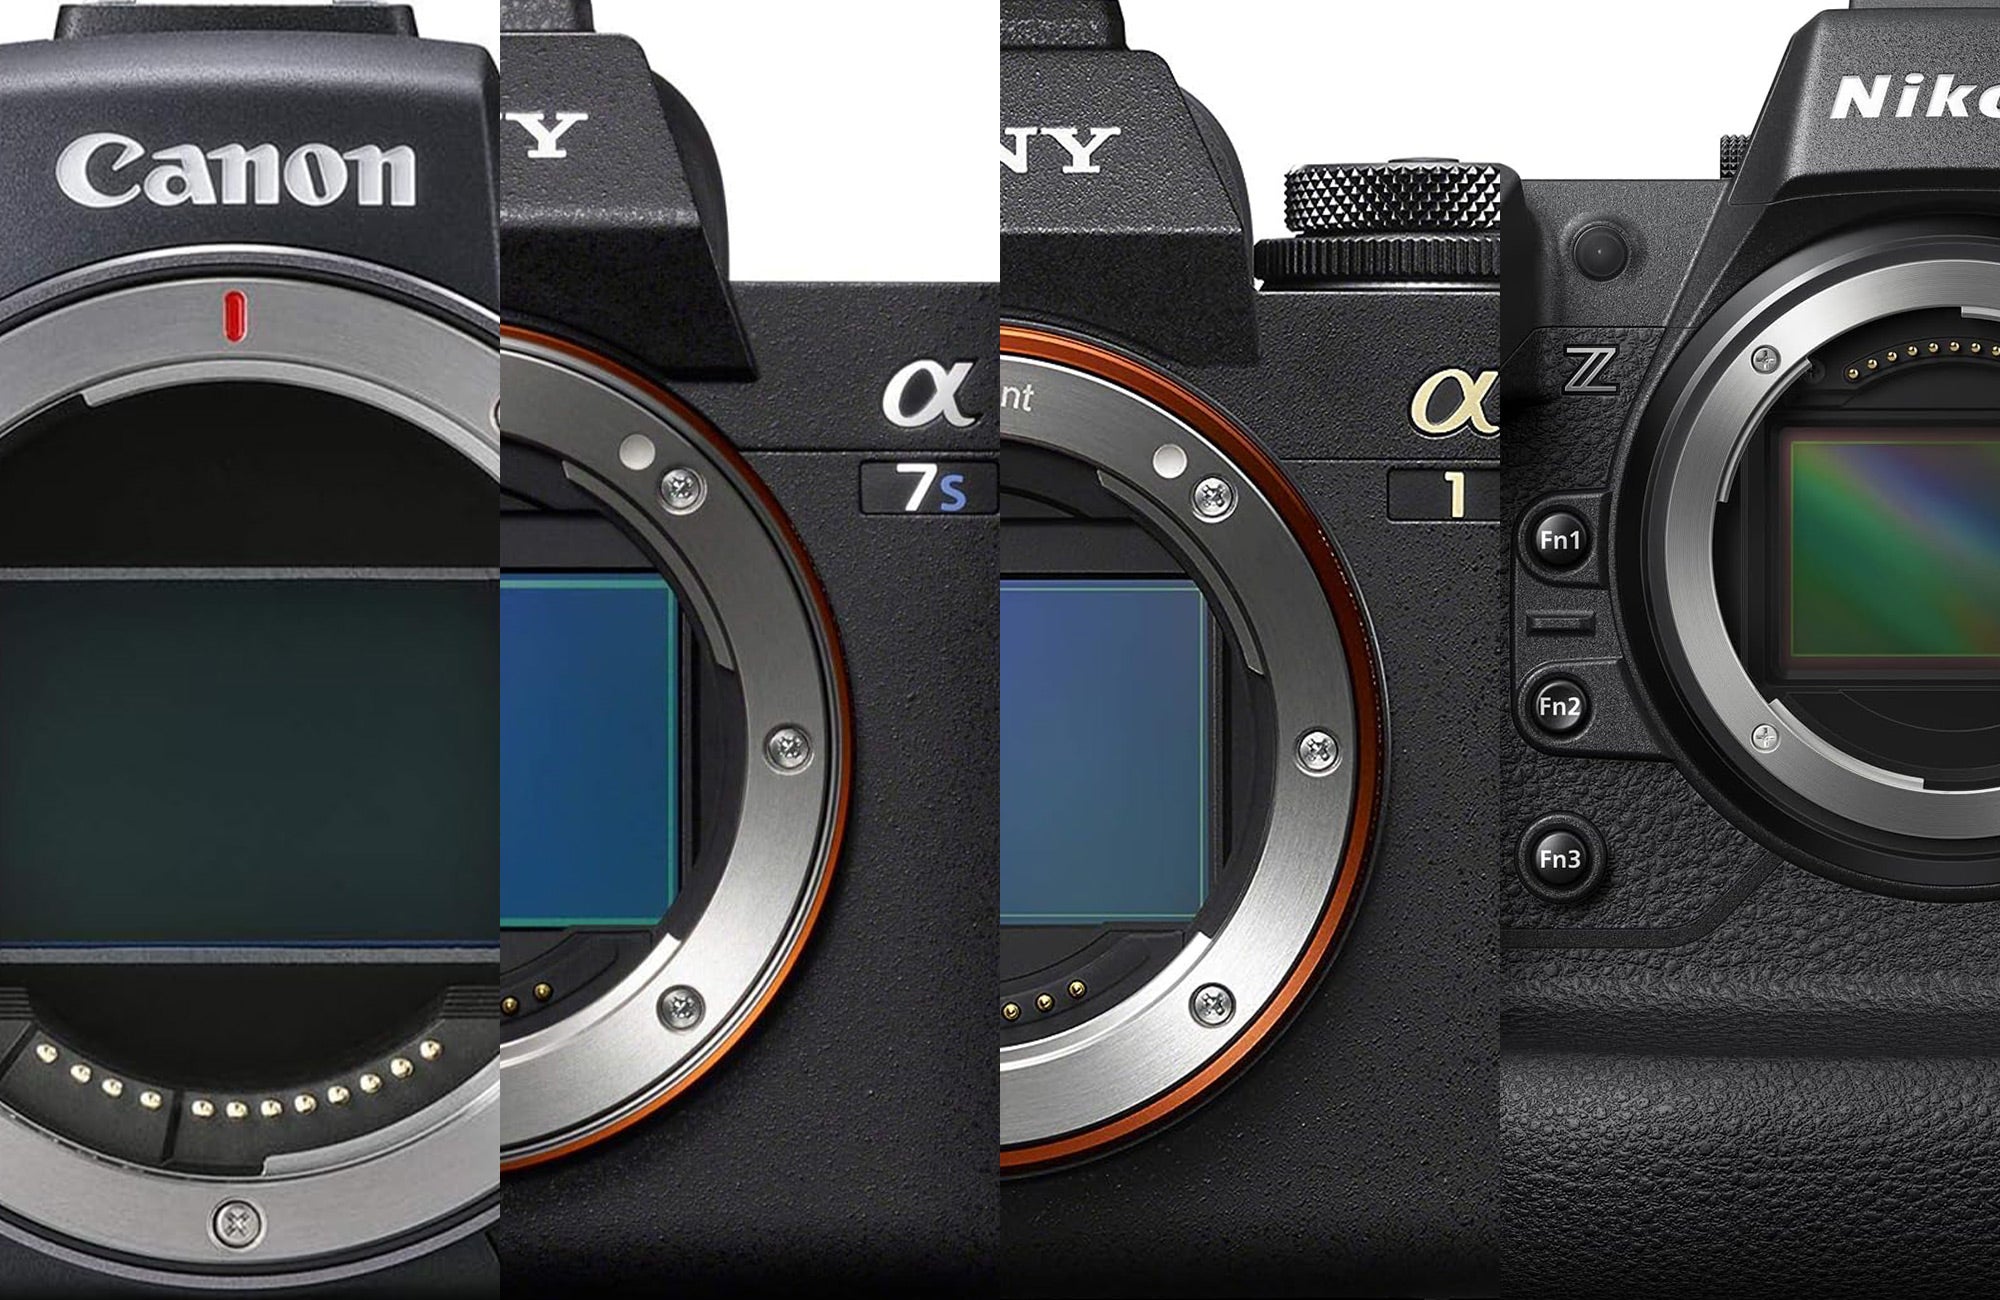 Hands On Review Roundup: The New Sony Alpha 7C II, Sony